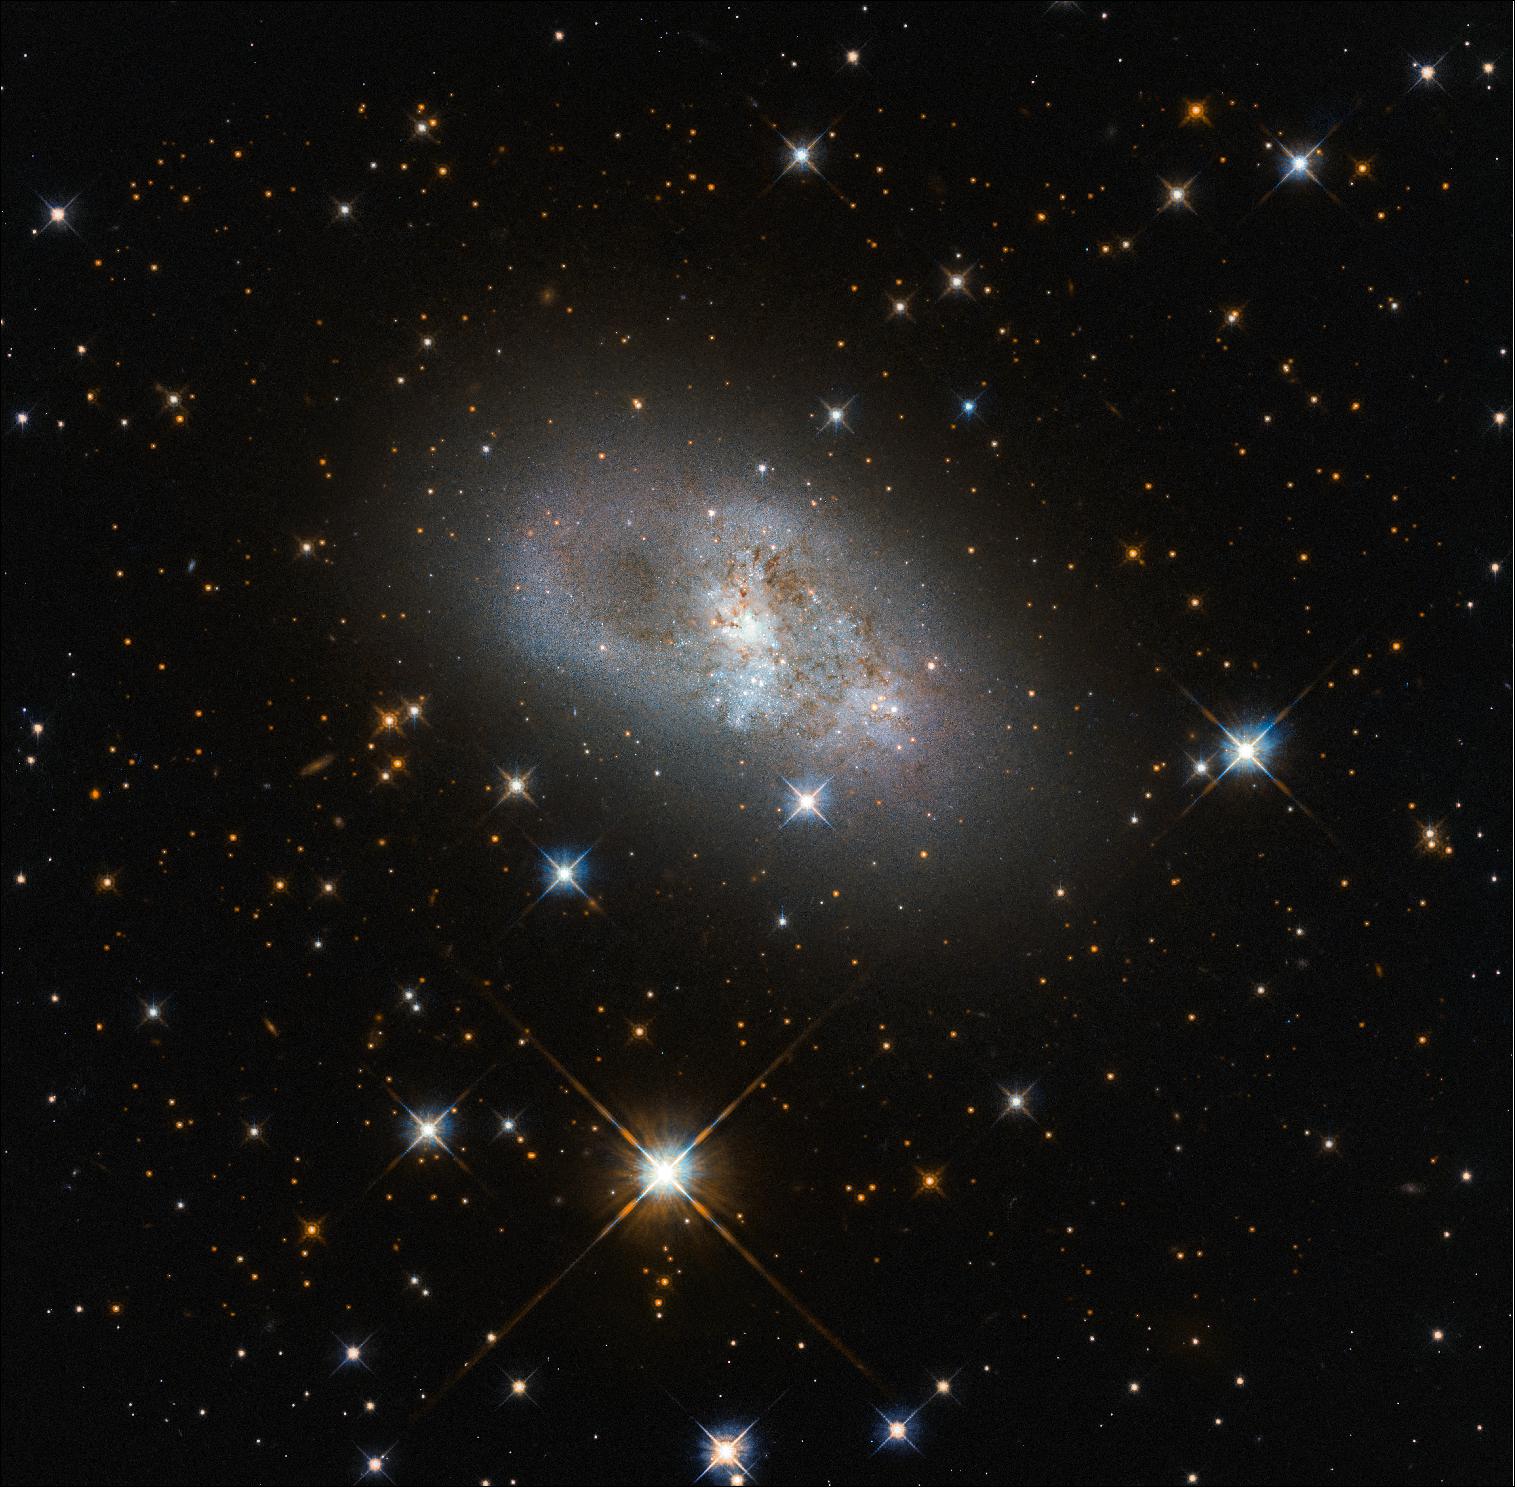 Figure 14: This image from the NASA/ESA Hubble Space Telescope shows IC 4653, a galaxy just above 80 million light-years from Earth. That may sound like quite a distance, but it’s not that far on a cosmic scale. At these kinds of distances, the types and structures of the objects we see are similar to those in our local area [image credit: ESA/Hubble & NASA, D. Rosario (CEA, Durham University) (CC BY 4.0)]